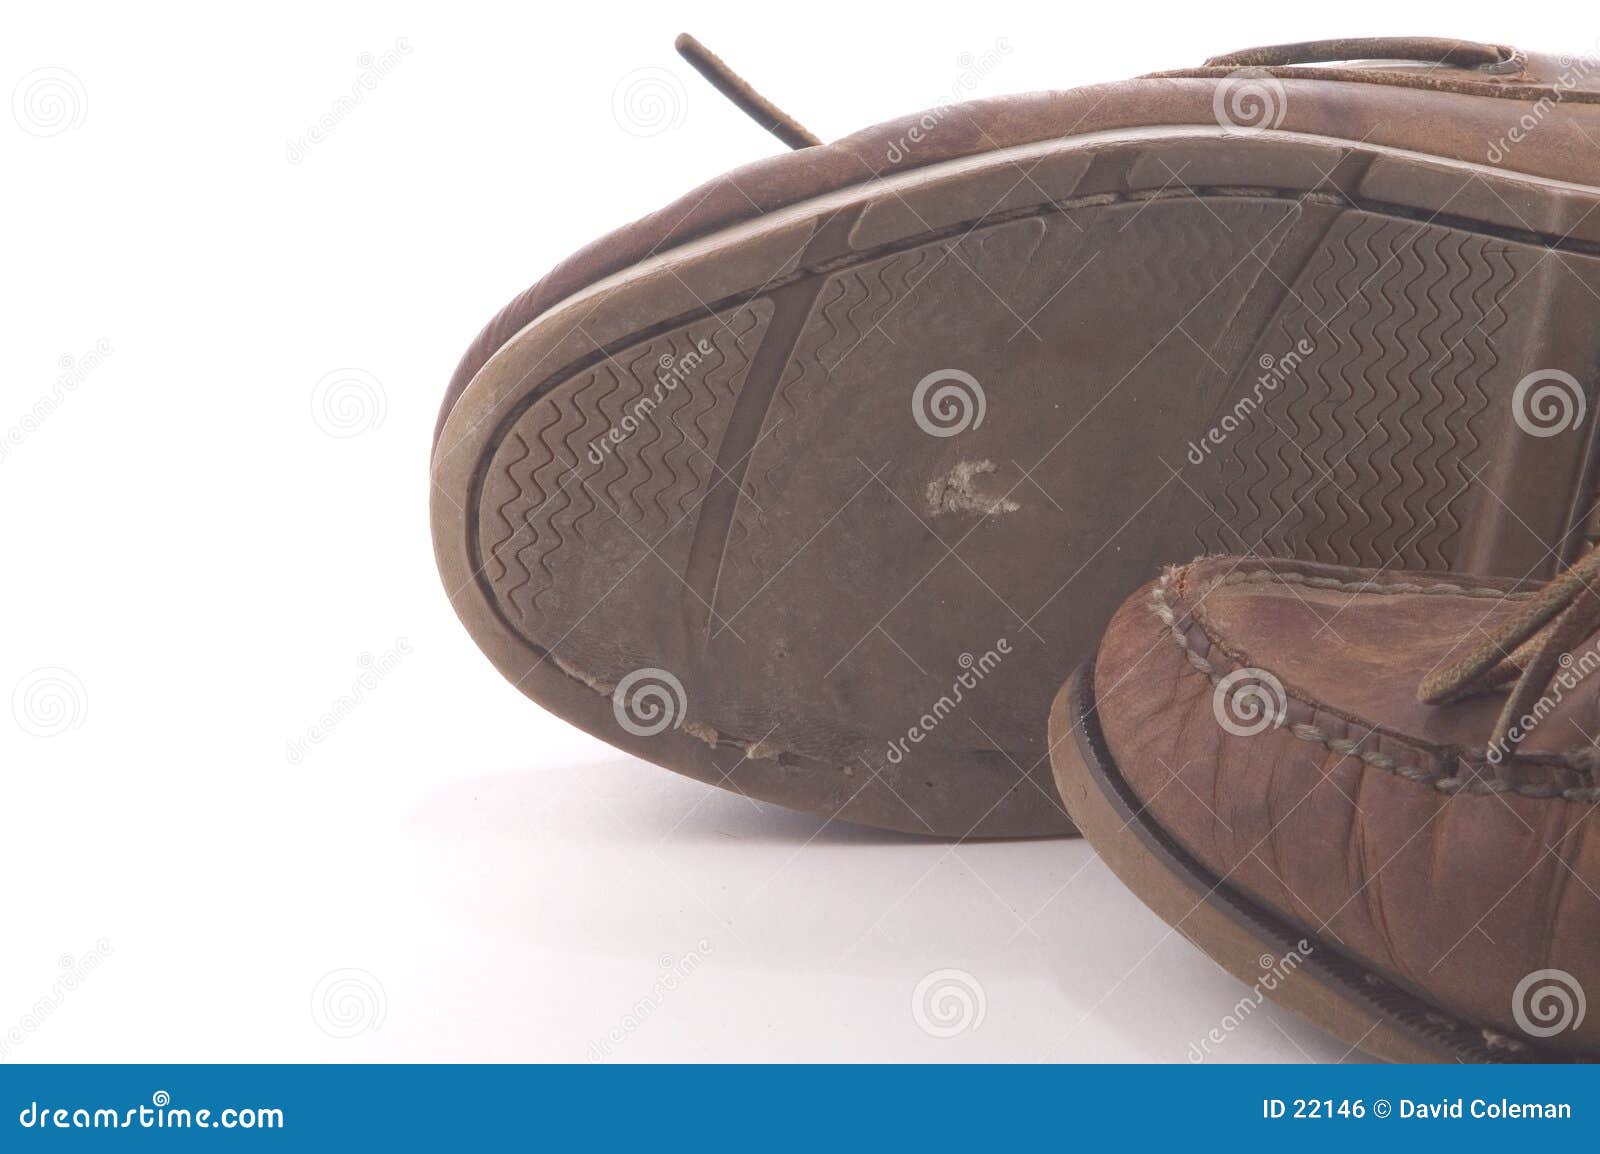 Worn Shoes stock photo. Image of shoes, tread, stitching - 22146